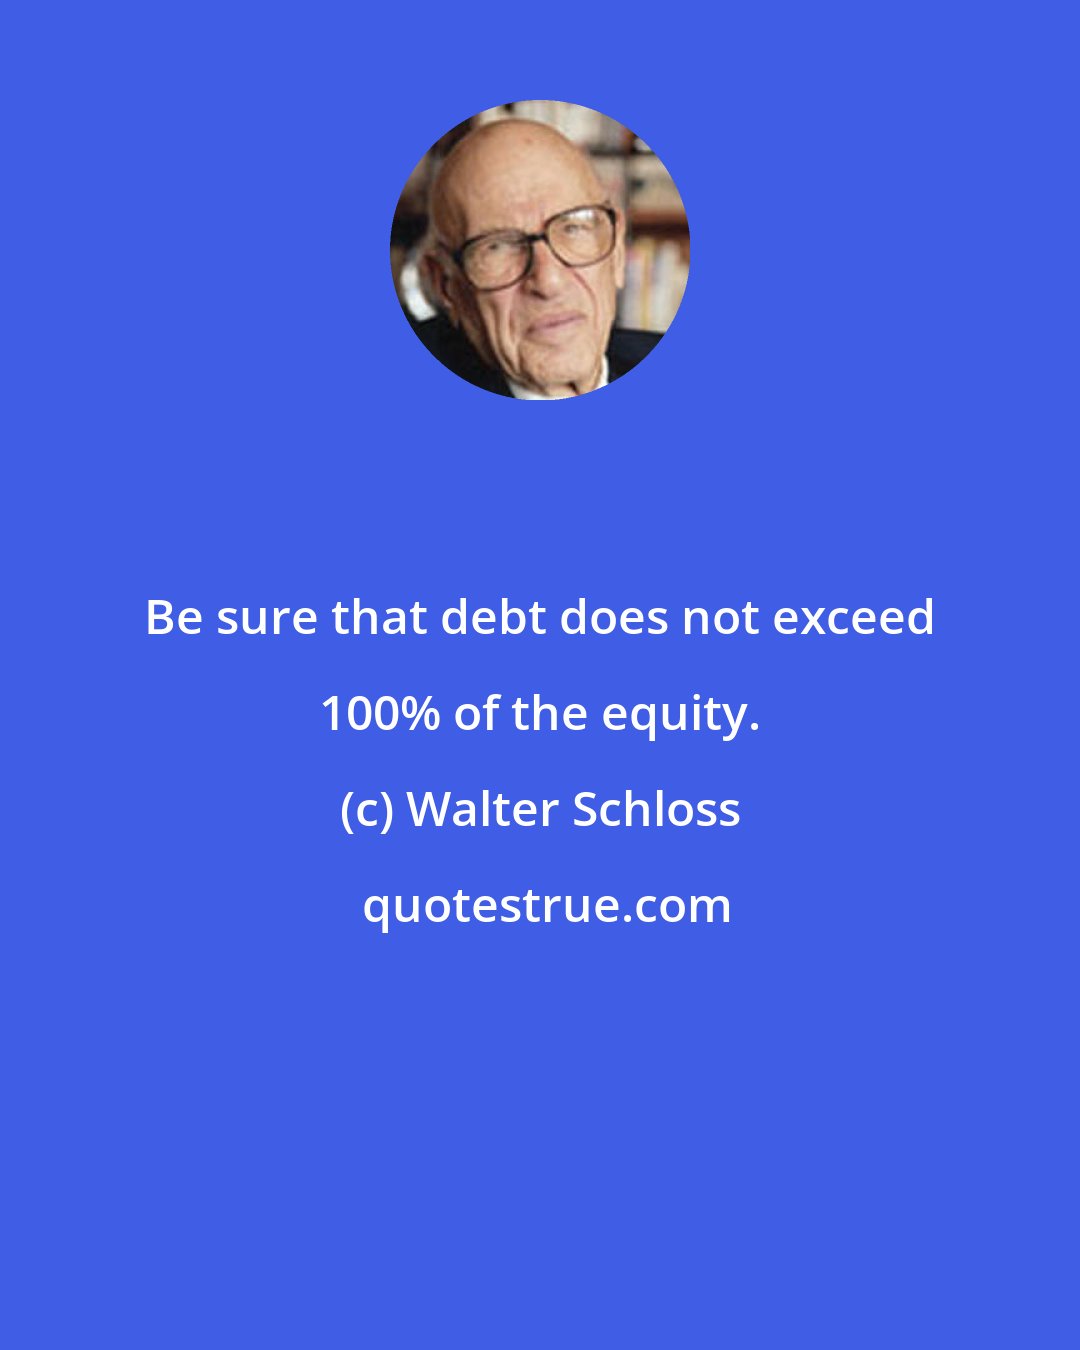 Walter Schloss: Be sure that debt does not exceed 100% of the equity.